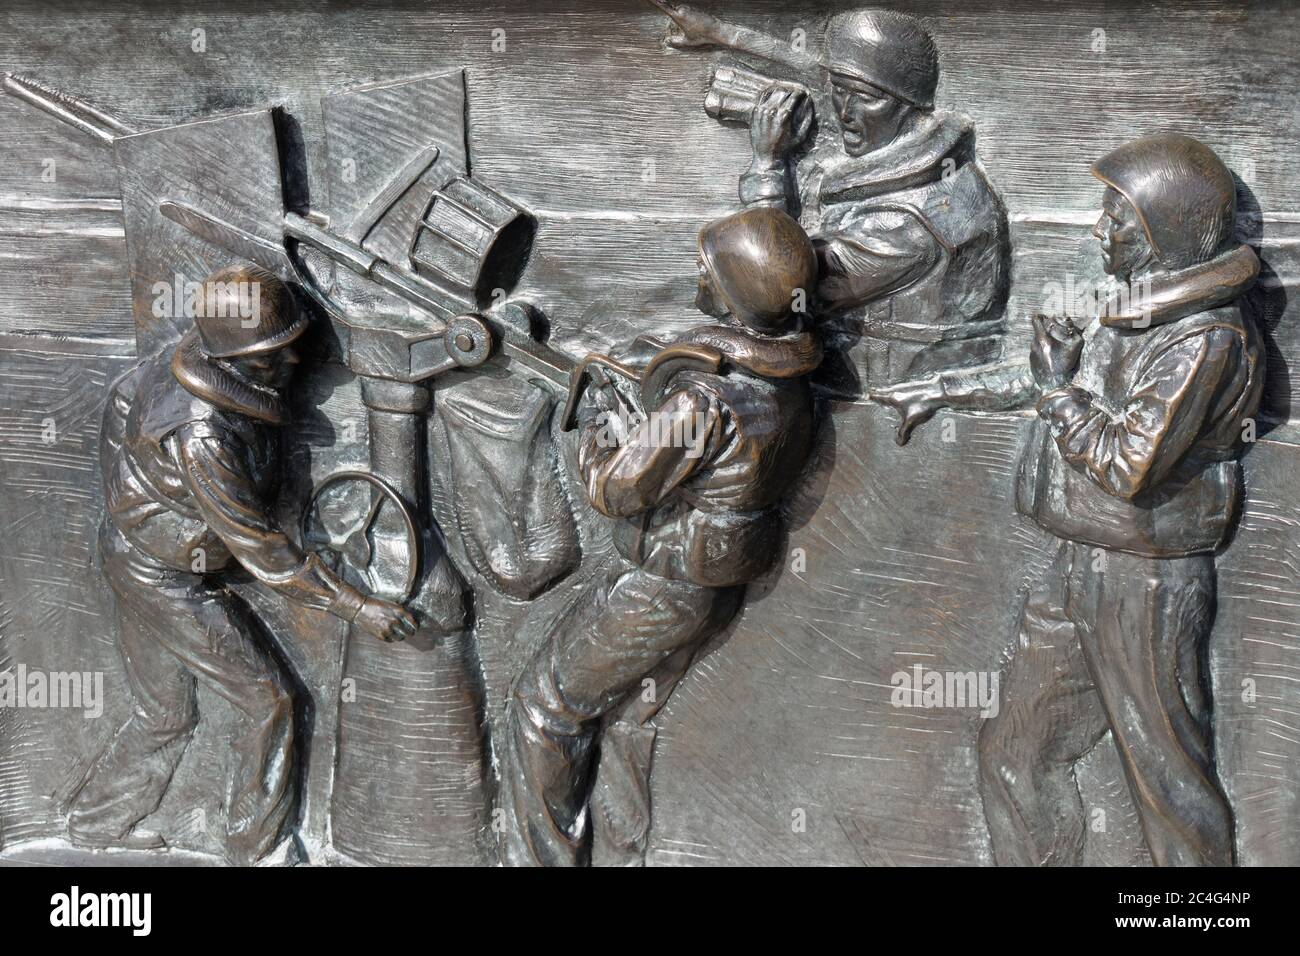 U.S. soldiers firing anti aircraft gun during the Battle of the Atlantic. Bronze bas-relief located on the World War II Memorial, Washington, DC, USA. Stock Photo